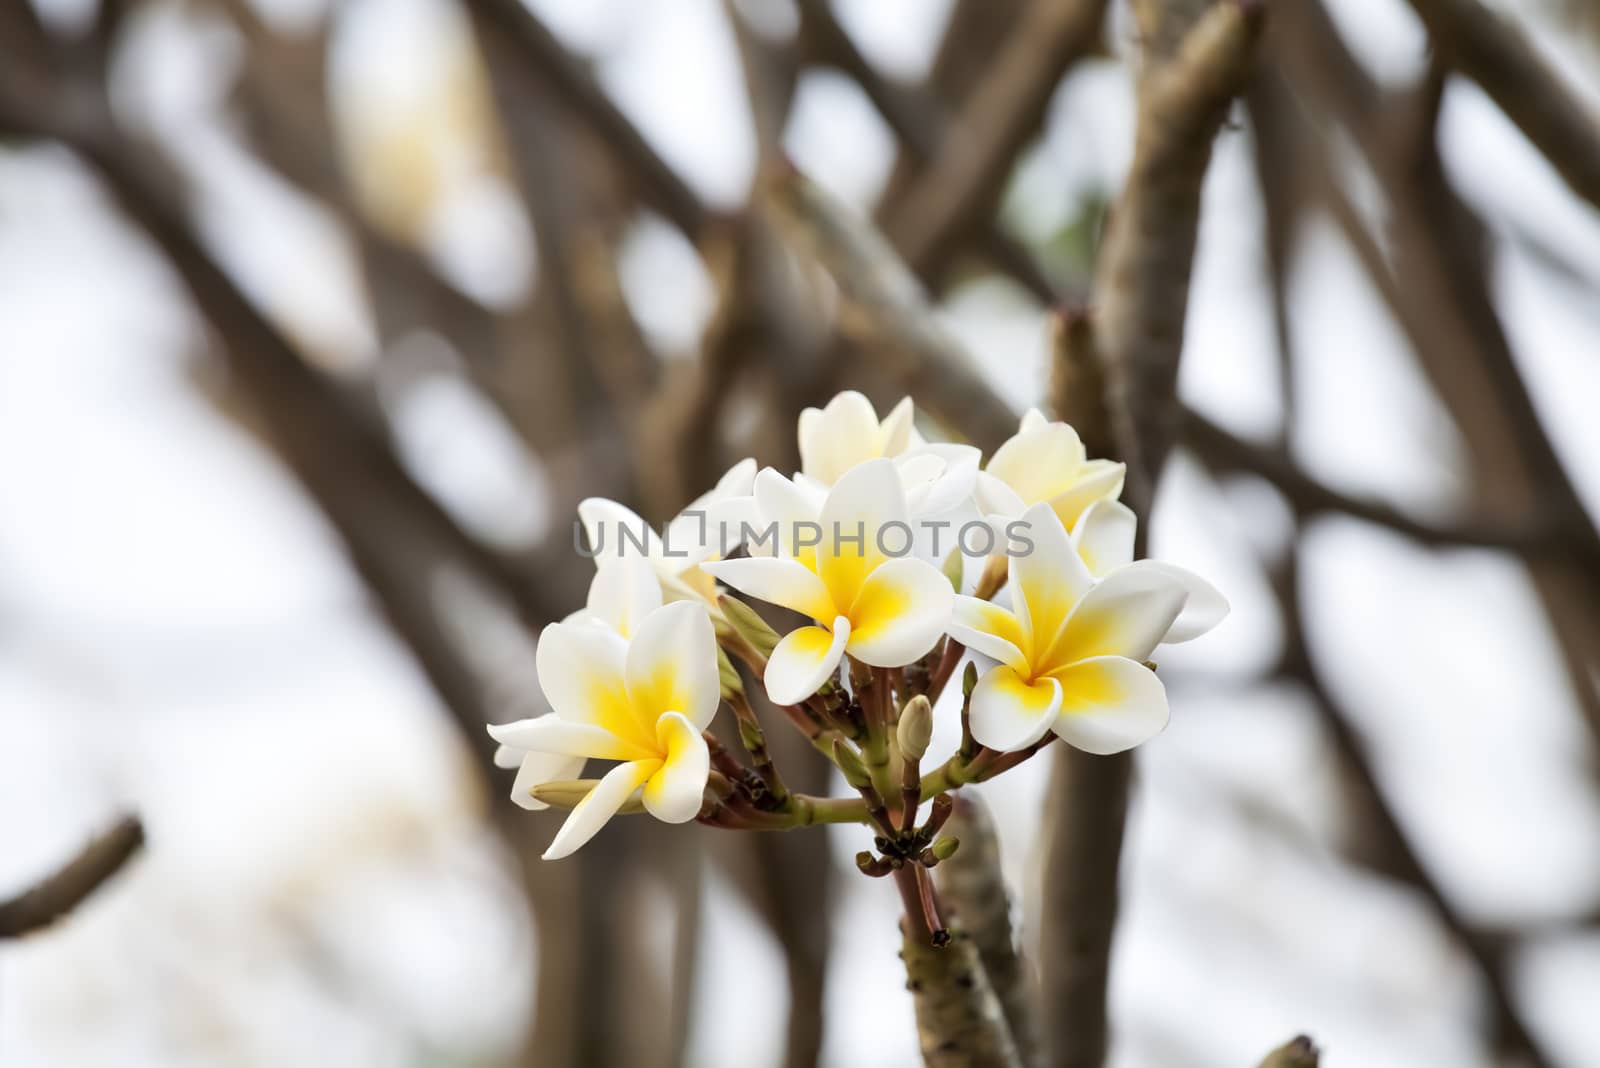 white and yellow frangipani flowers with branch in background